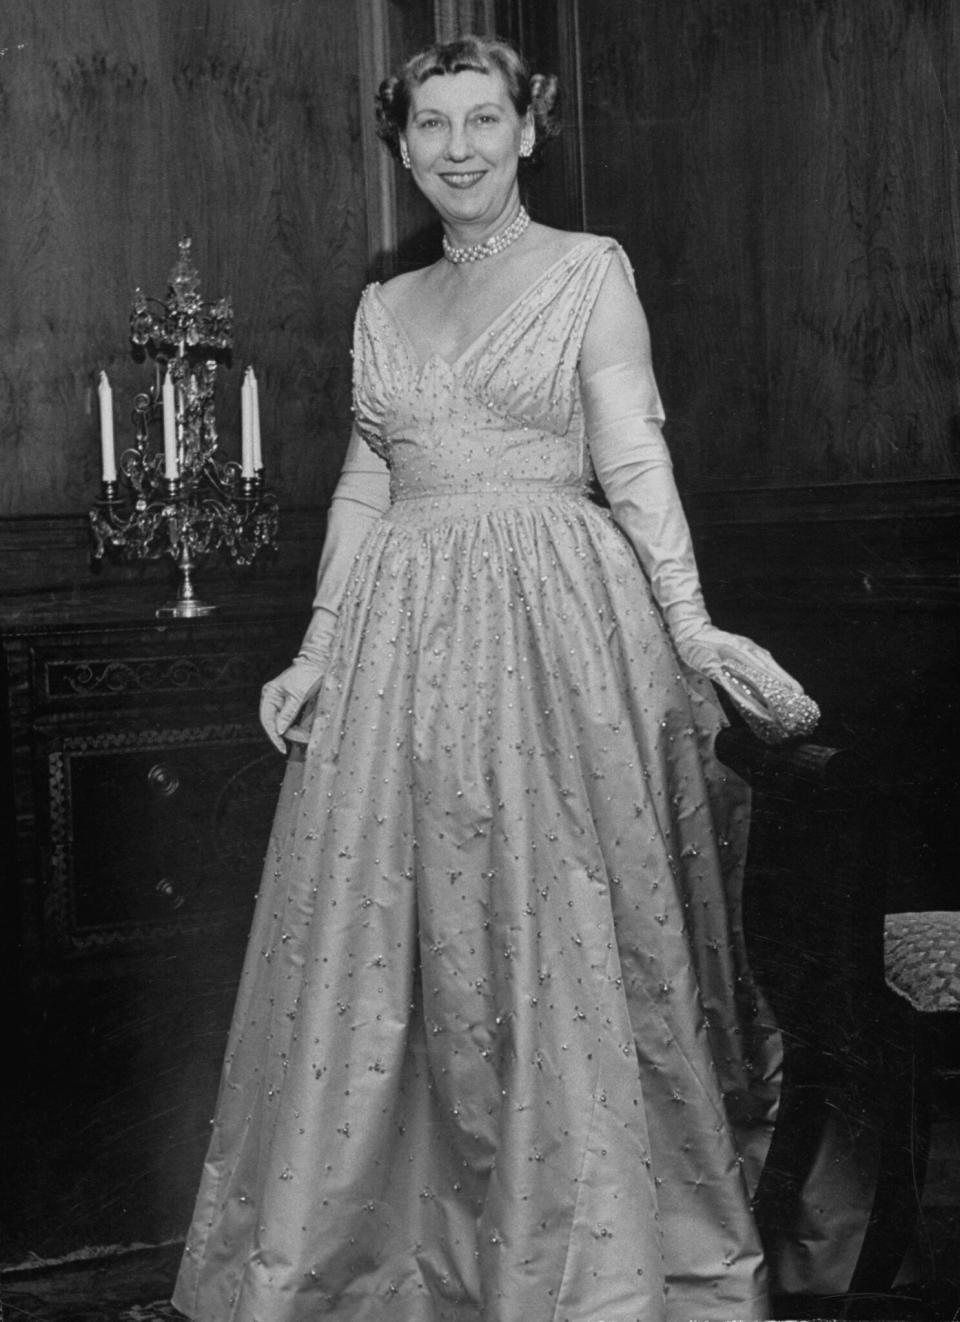 Mamie Eisenhower shows off the gown she wore for inaugural balls in 1953.